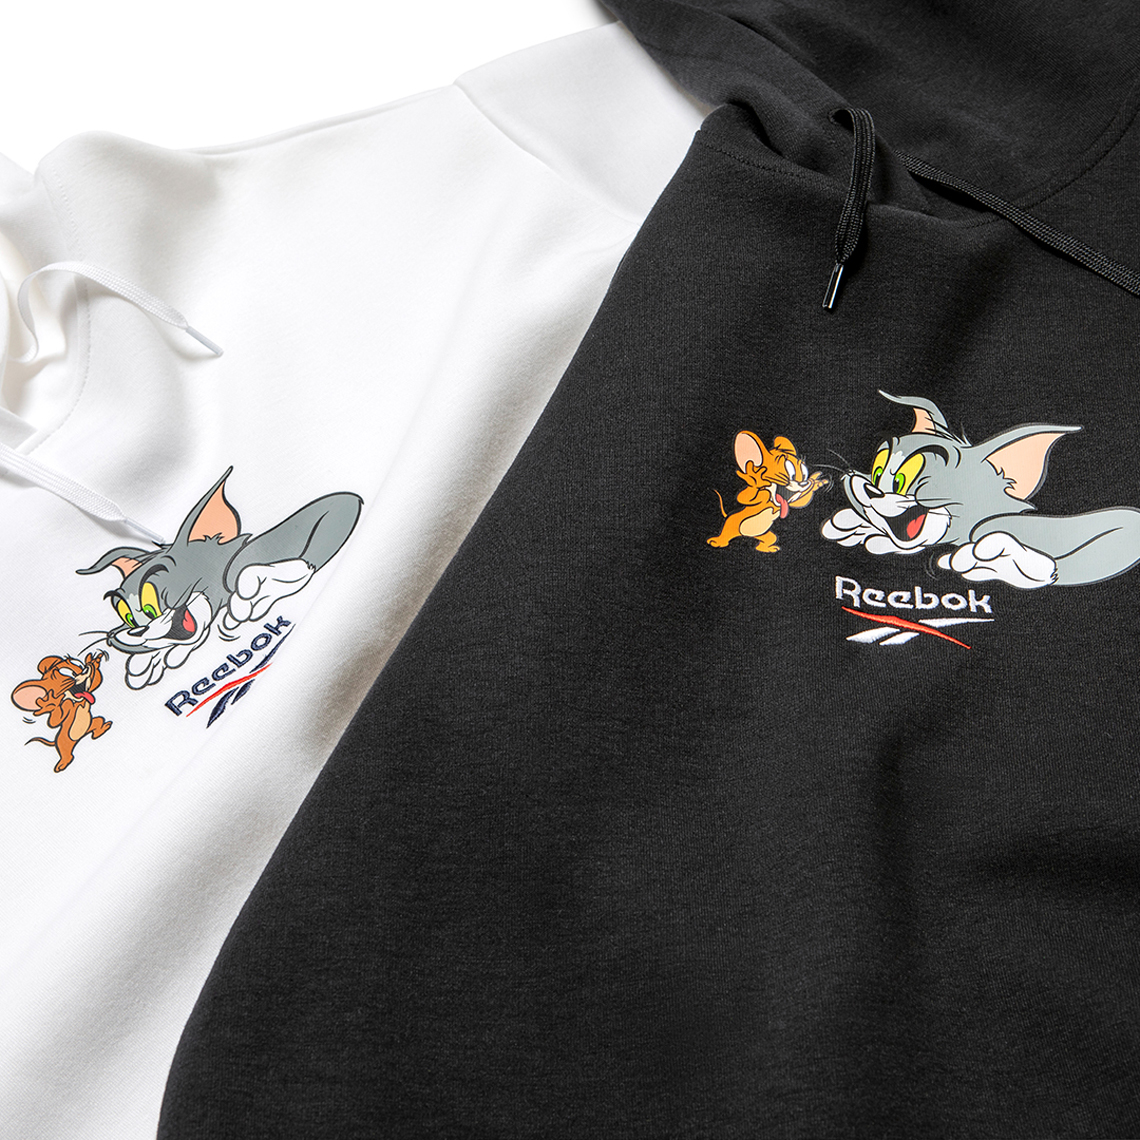 Reebok Tom Jerry Apparel Collection 2020 6